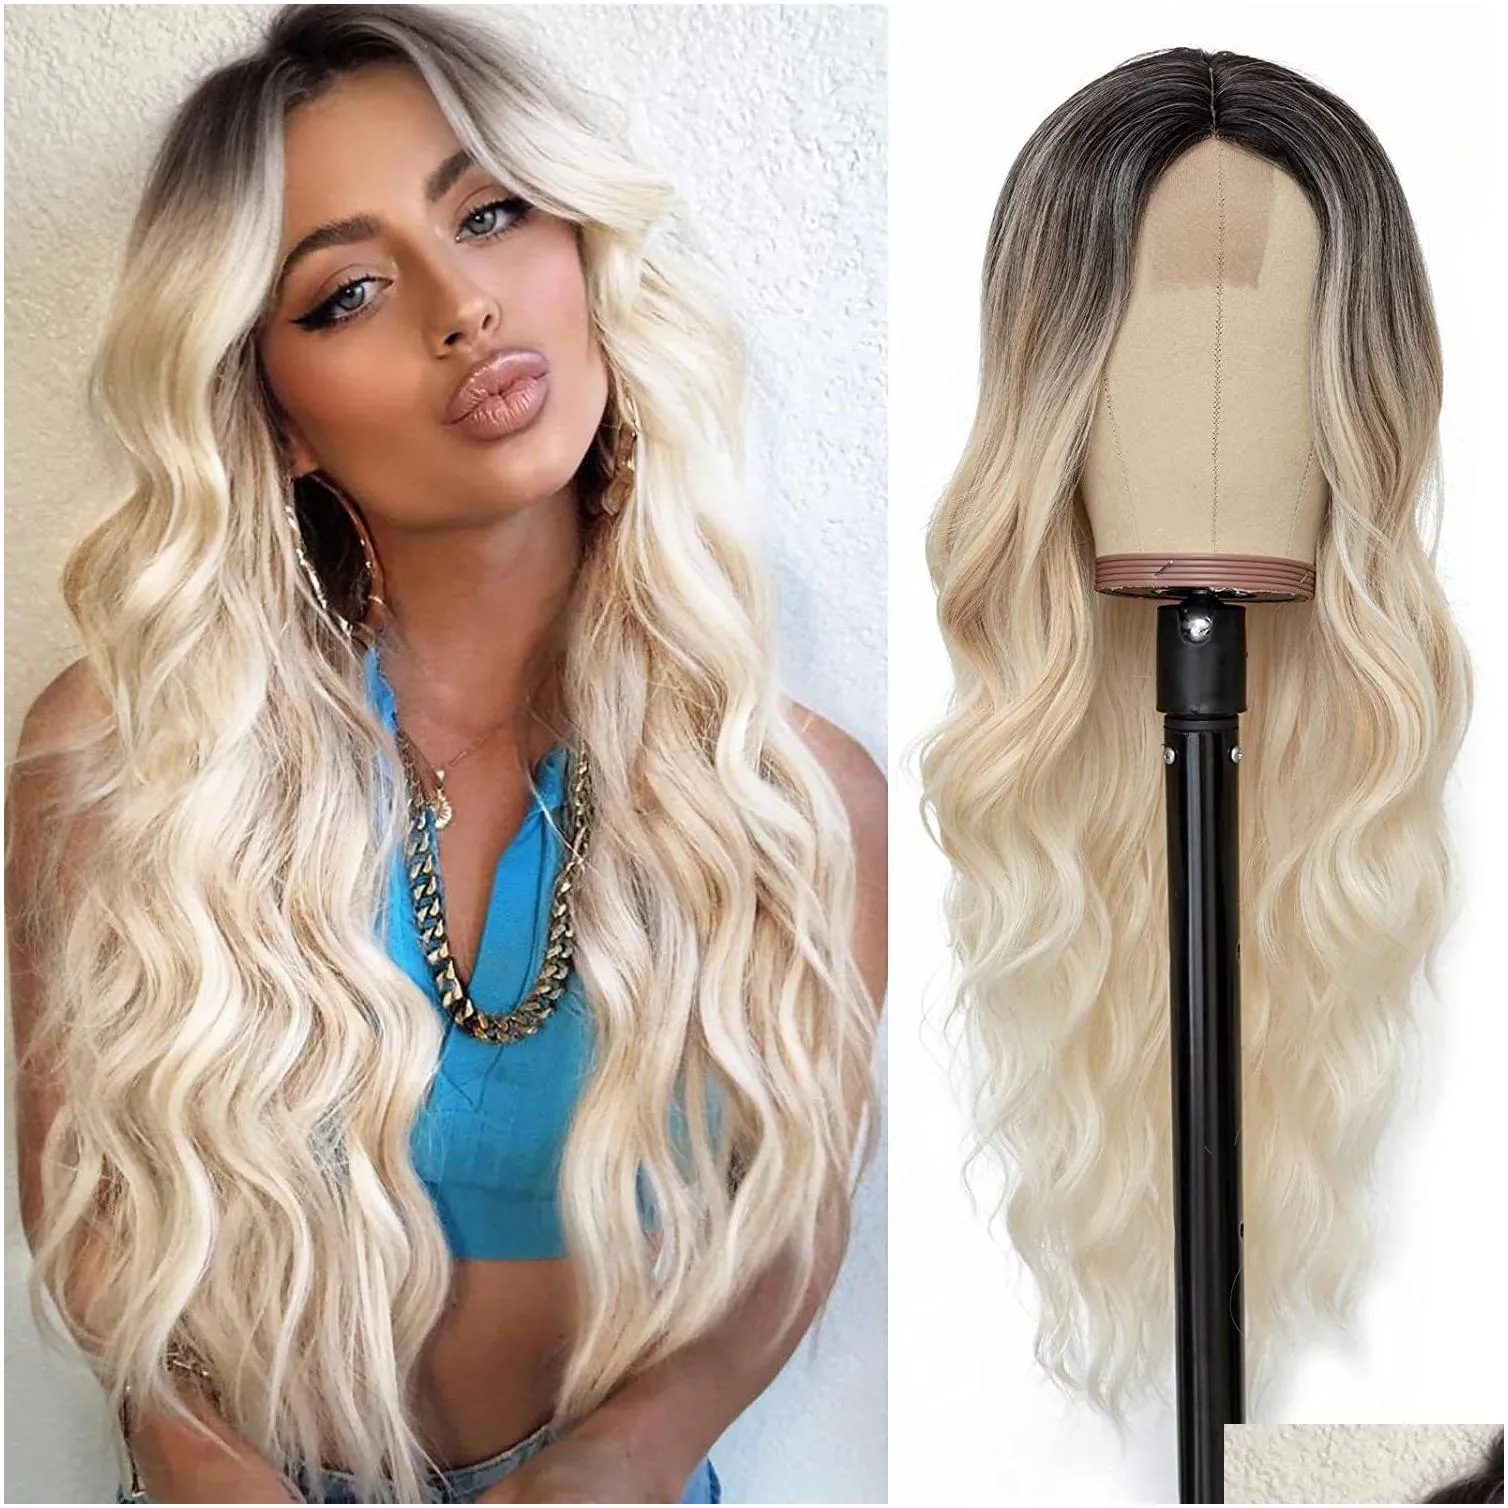 Wig Caps Wholesale Prices Premier Highlight Color Virgin Hair Natural Wave 360 Lace Human Frontal With Baby Fast Ship Drop Delivery Pr Dh7Fq